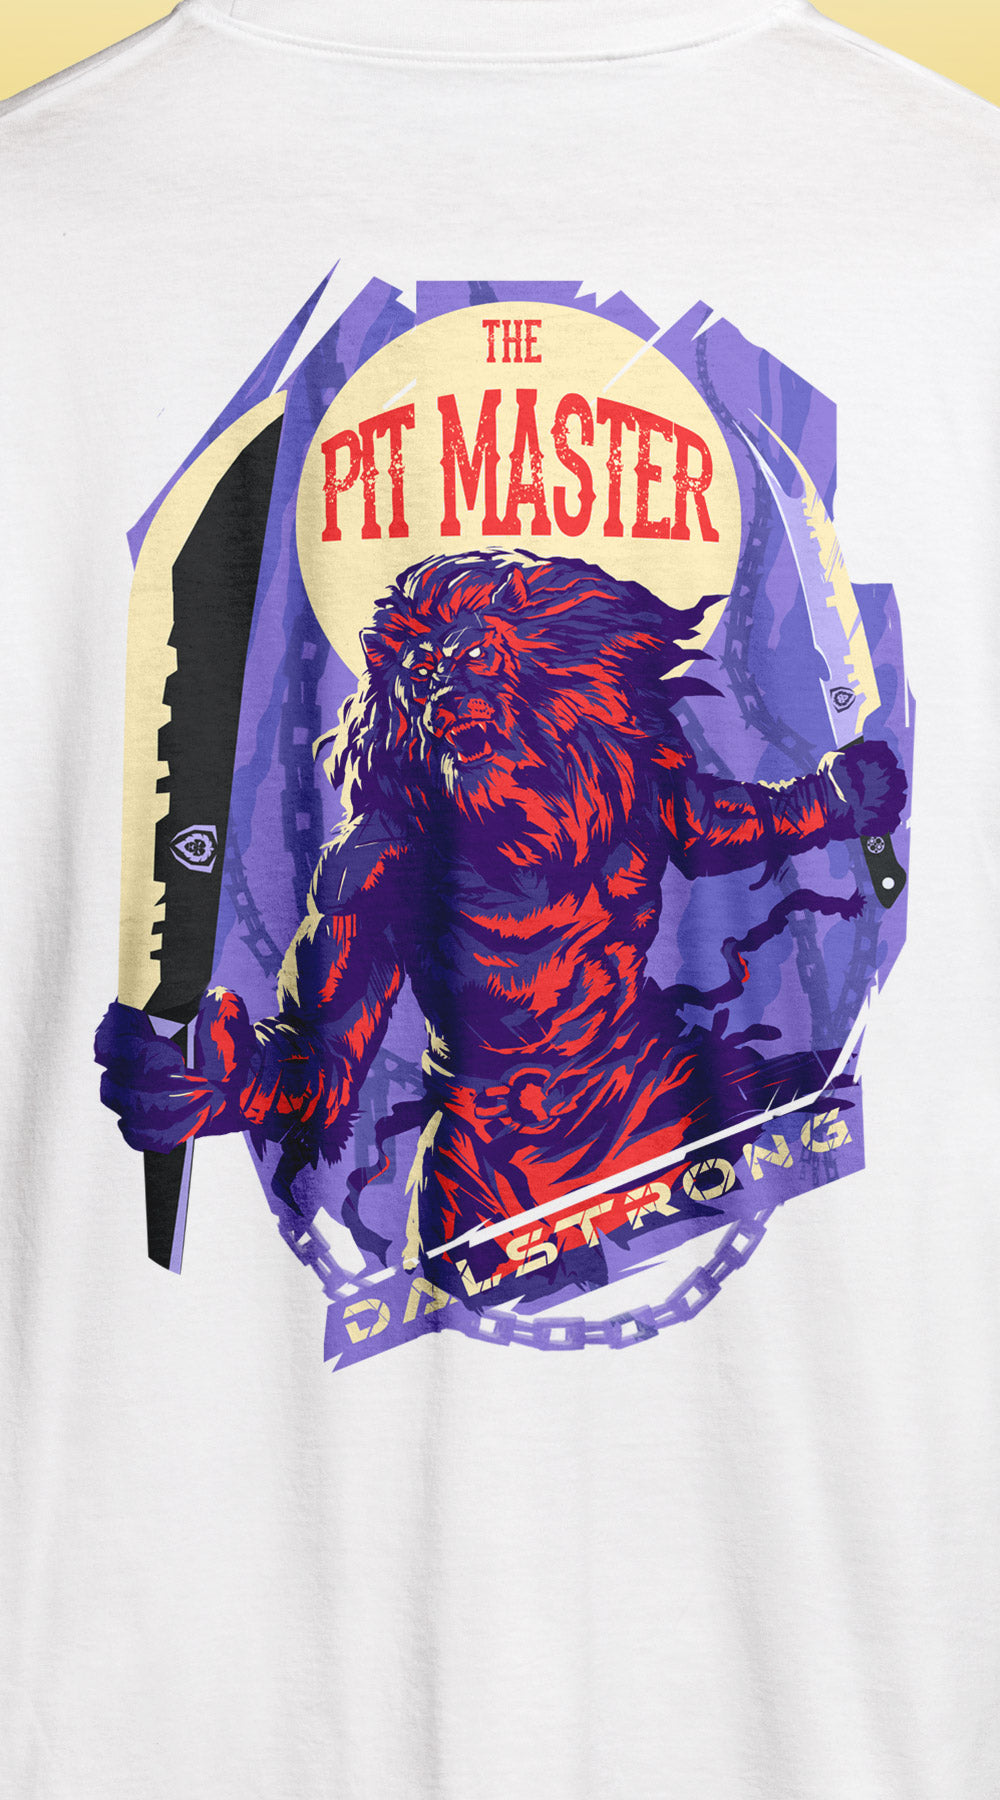 Dalstrong beast mode on tee white back design.